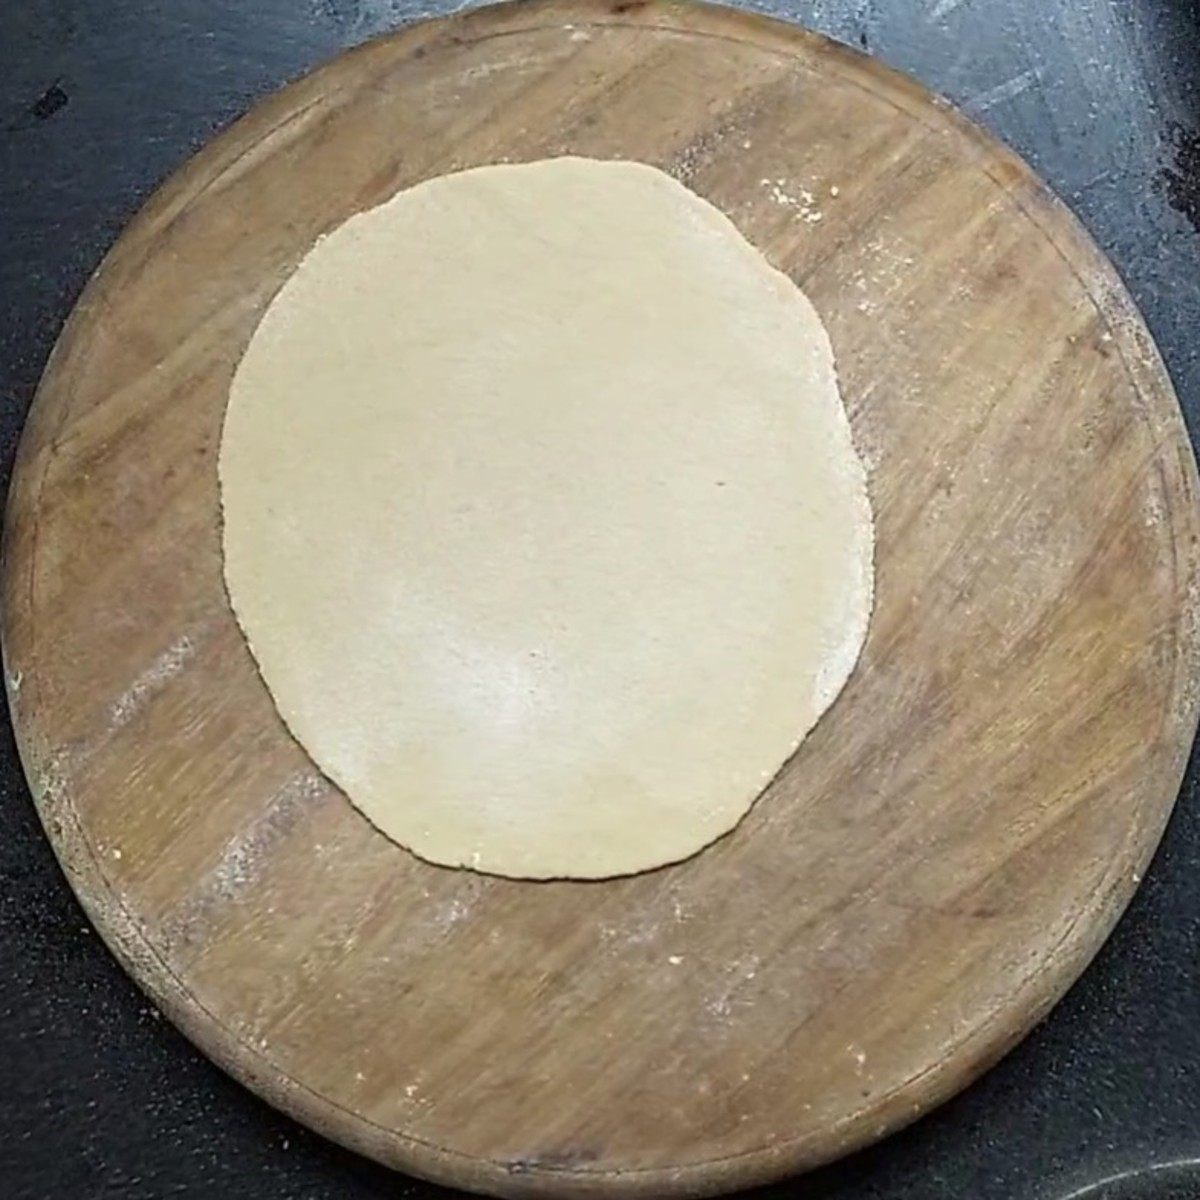 Prepare balls from the dough. Take a ball on the rolling board, sprinkle some wheat flour and roll it into a chapati.